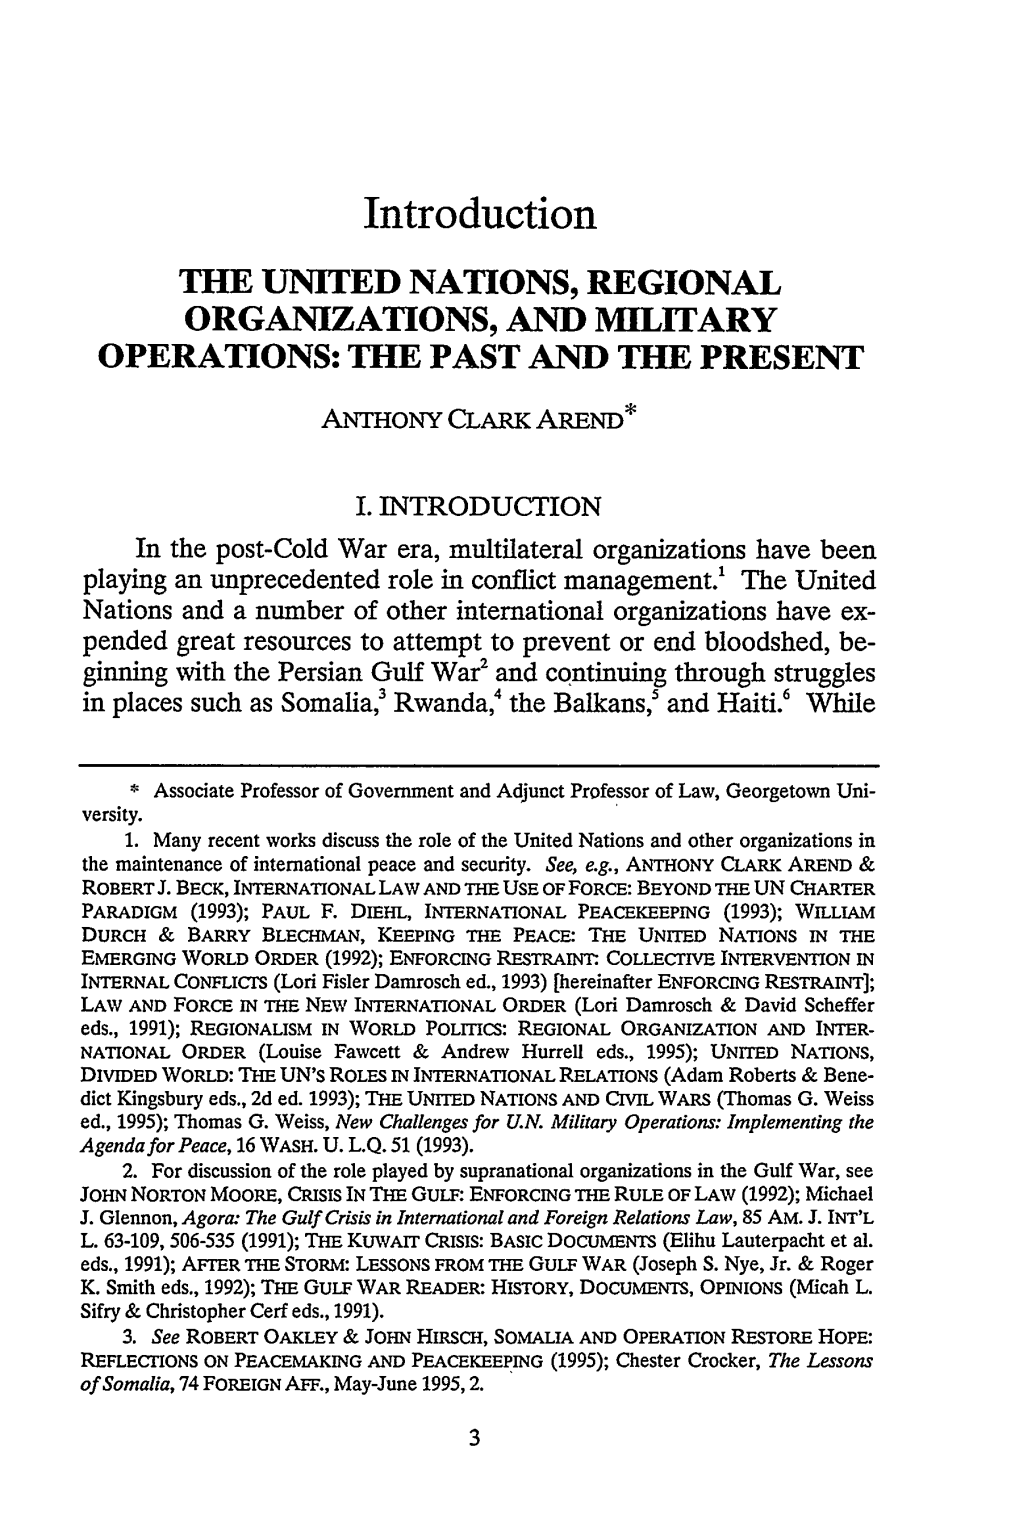 The United Nations, Regional Organizations, and Military Operations: the Past and the Present